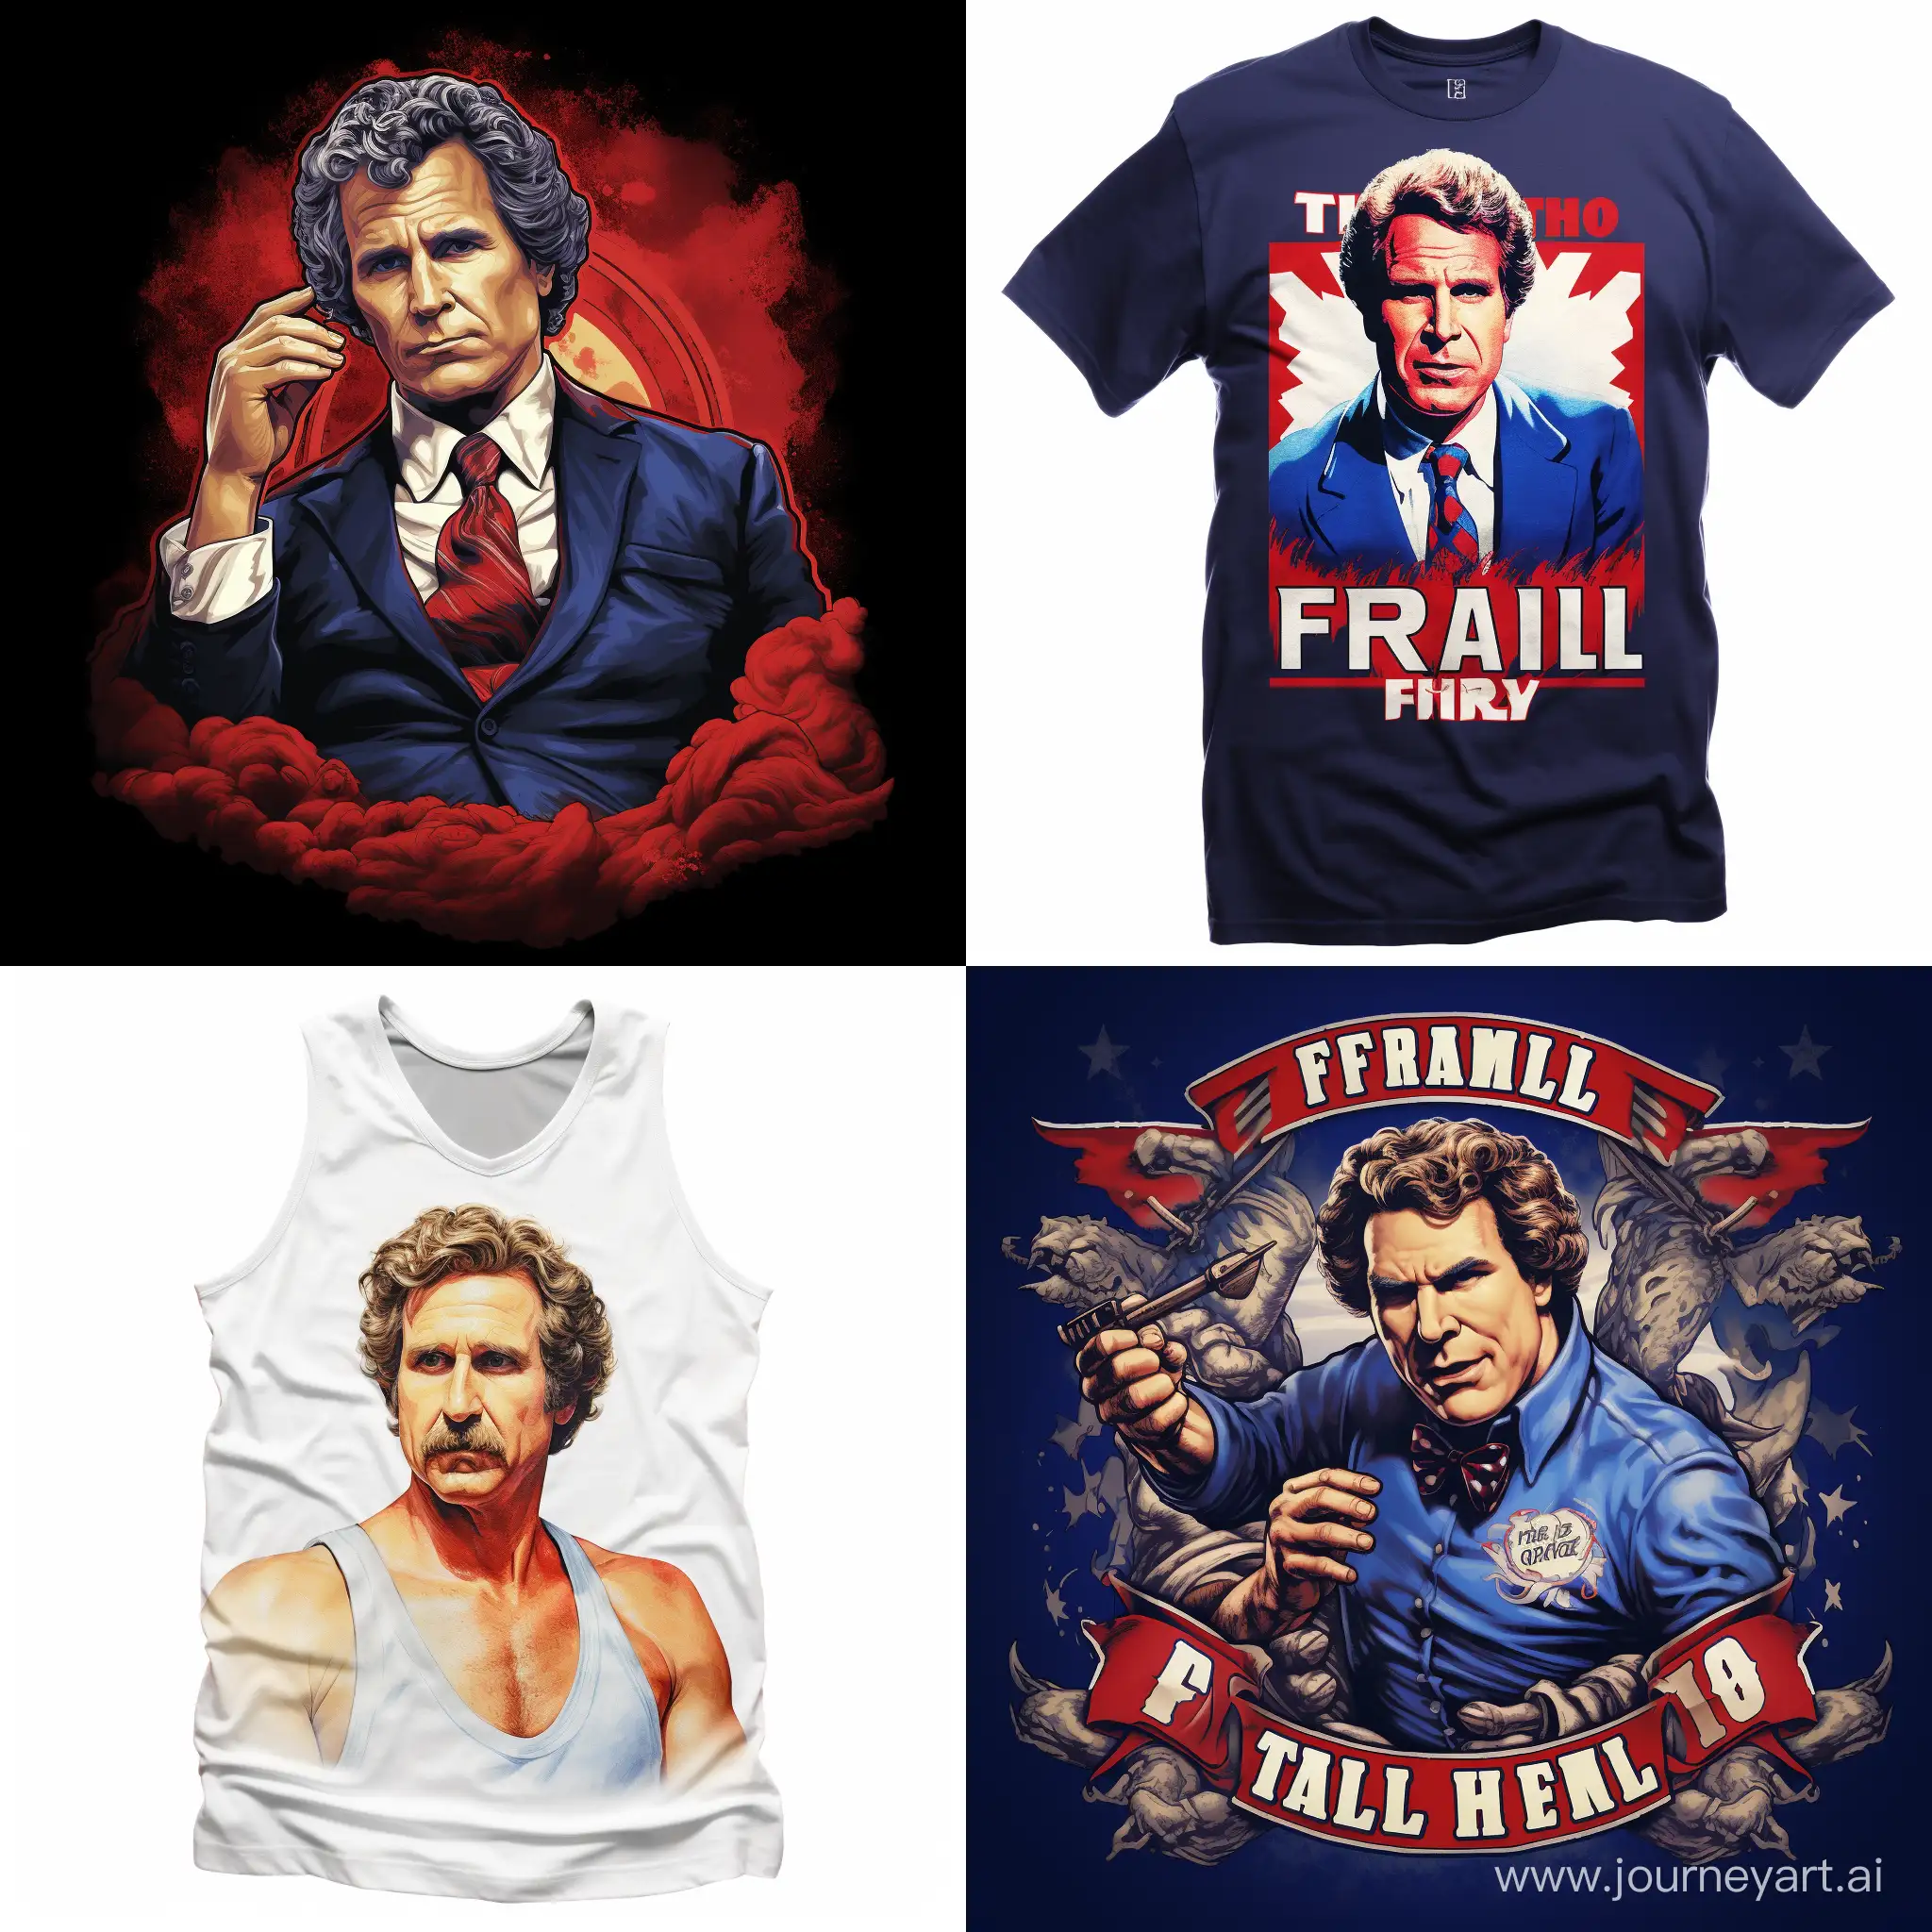 Will Ferrell Frank the tank from old school on a t shirt